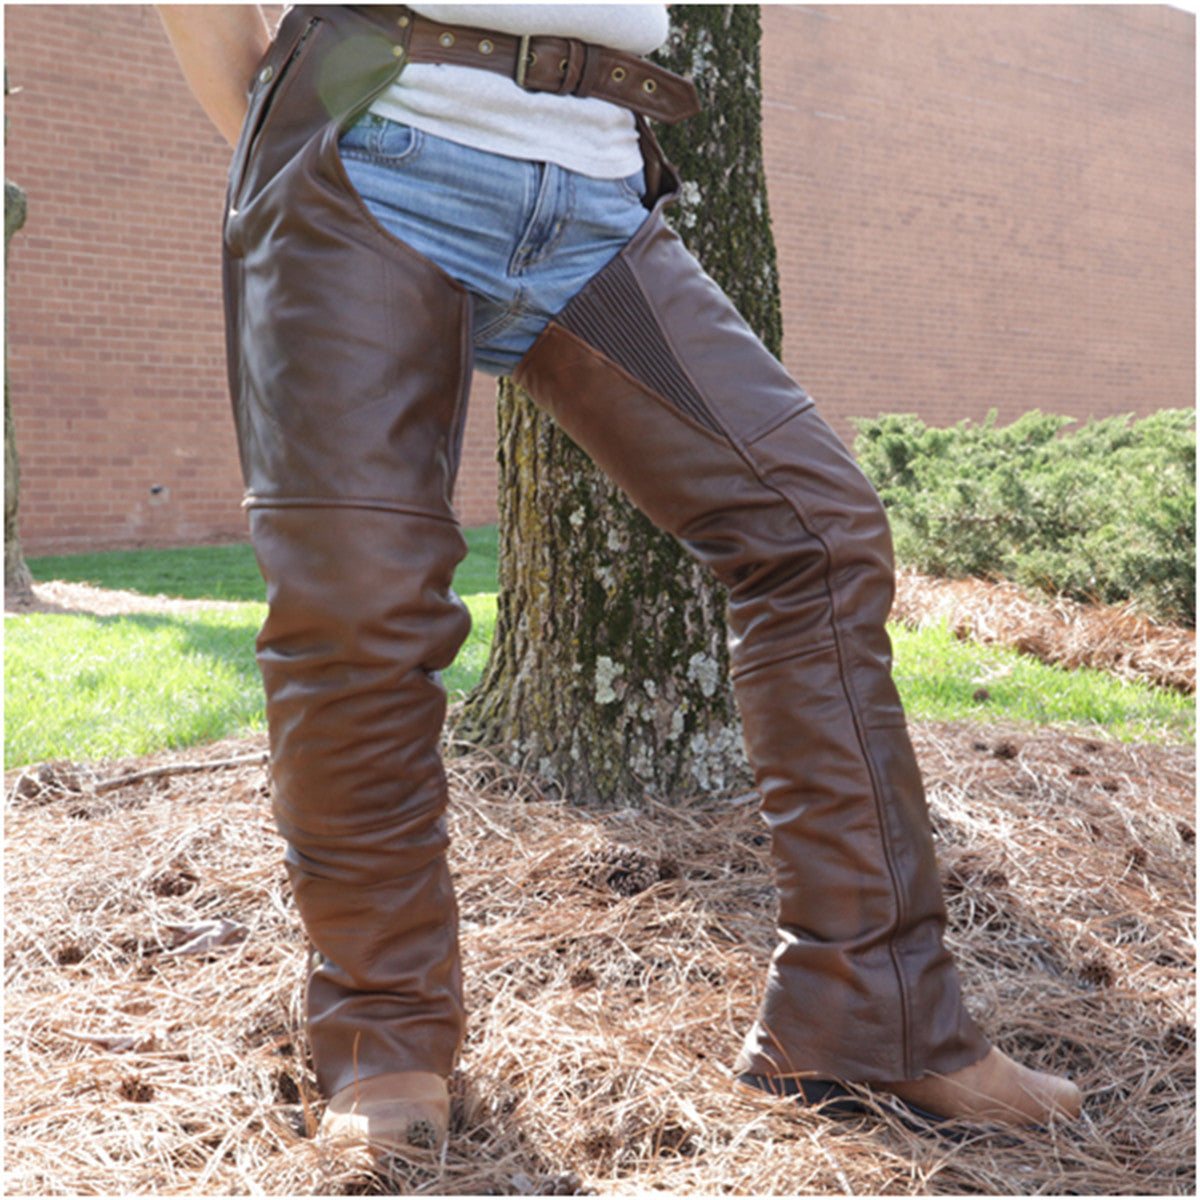 VL811 R Vance Leather Four Pocket Premium Leather Chaps with Removable Liner in Retro Brown - Daytona Bikers Wear